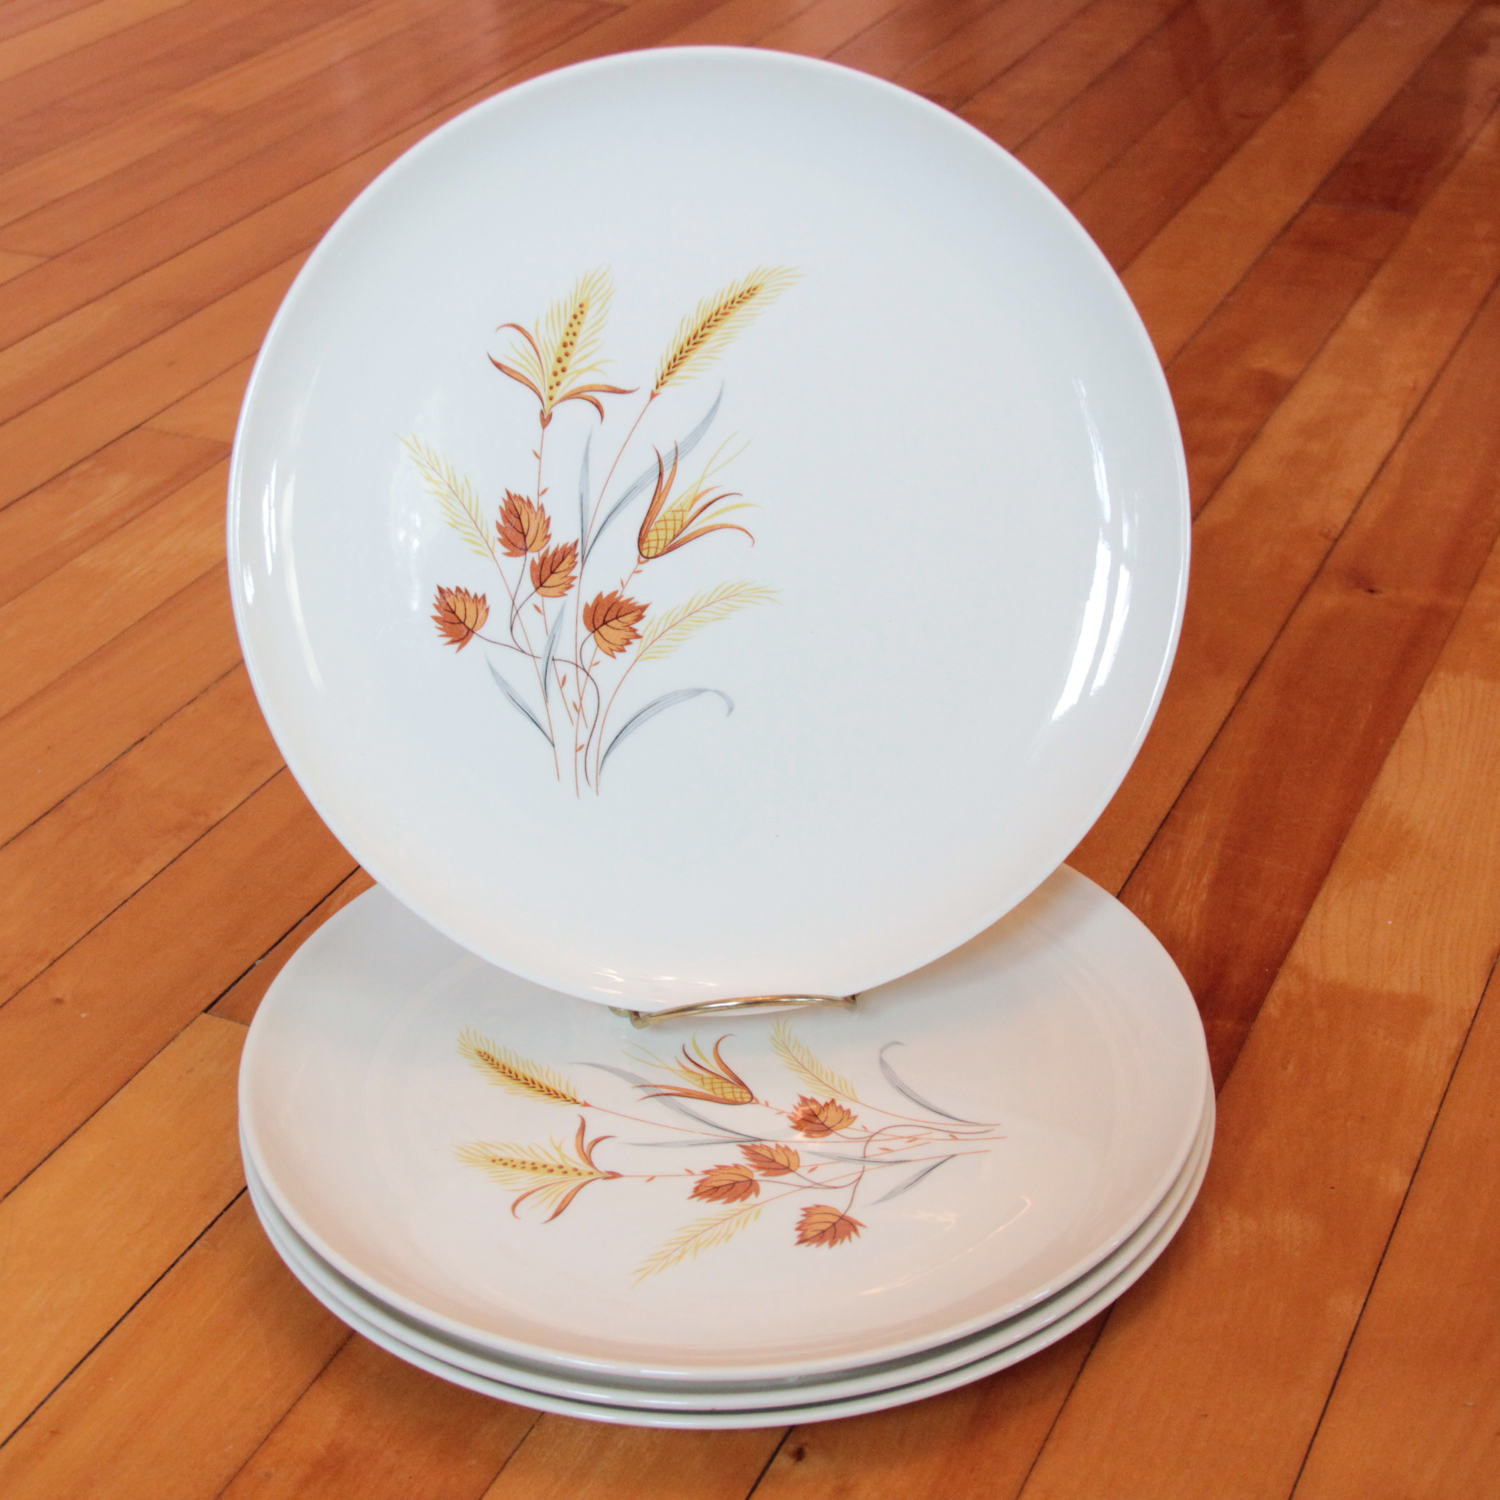 Fall Dinner Plates
 Autumn Harvest Dinner Plates Every Yours Taylor Smith & Taylor